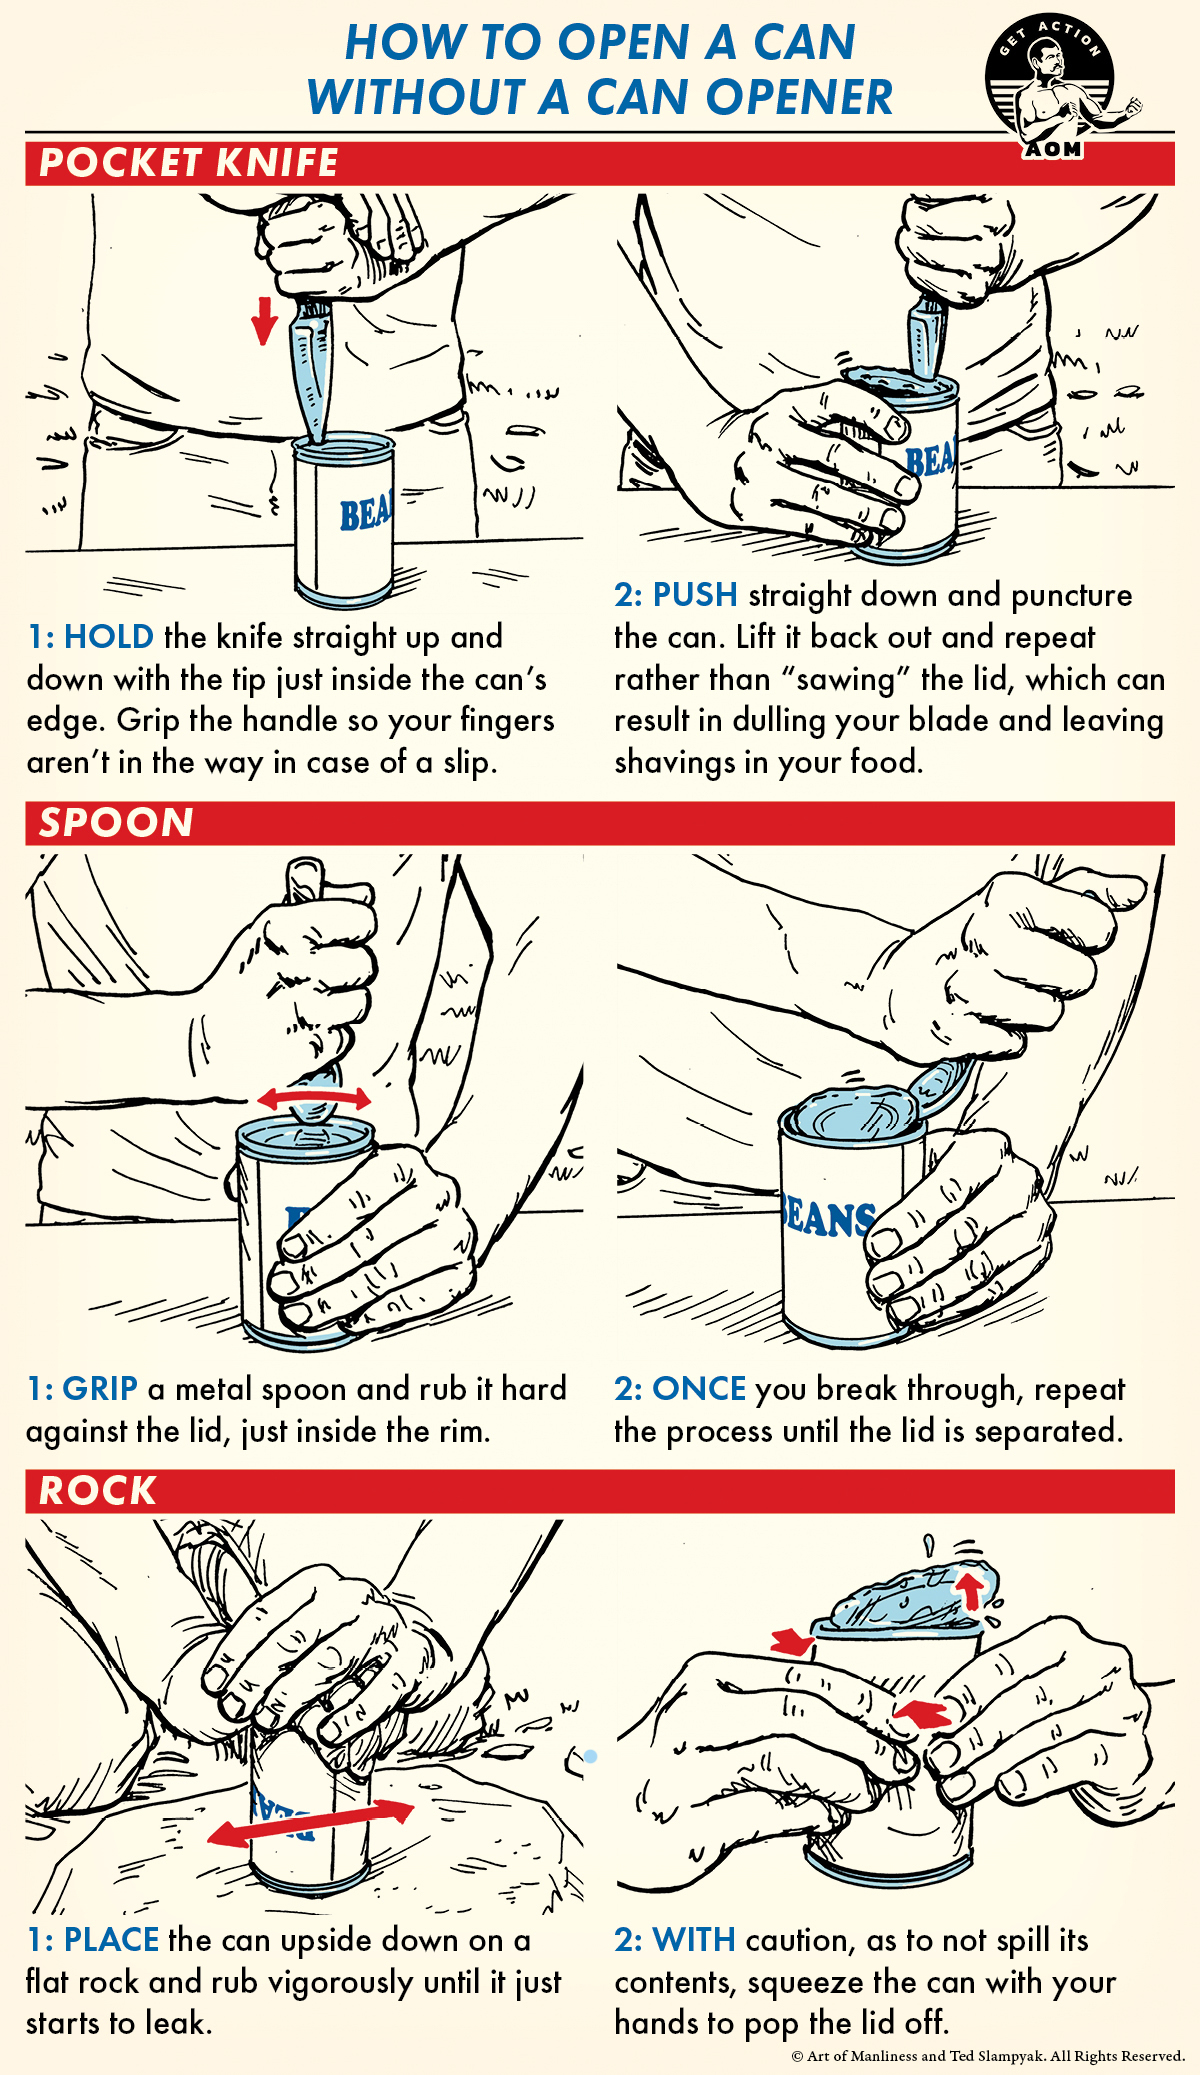 Open a can without an opener illustration.